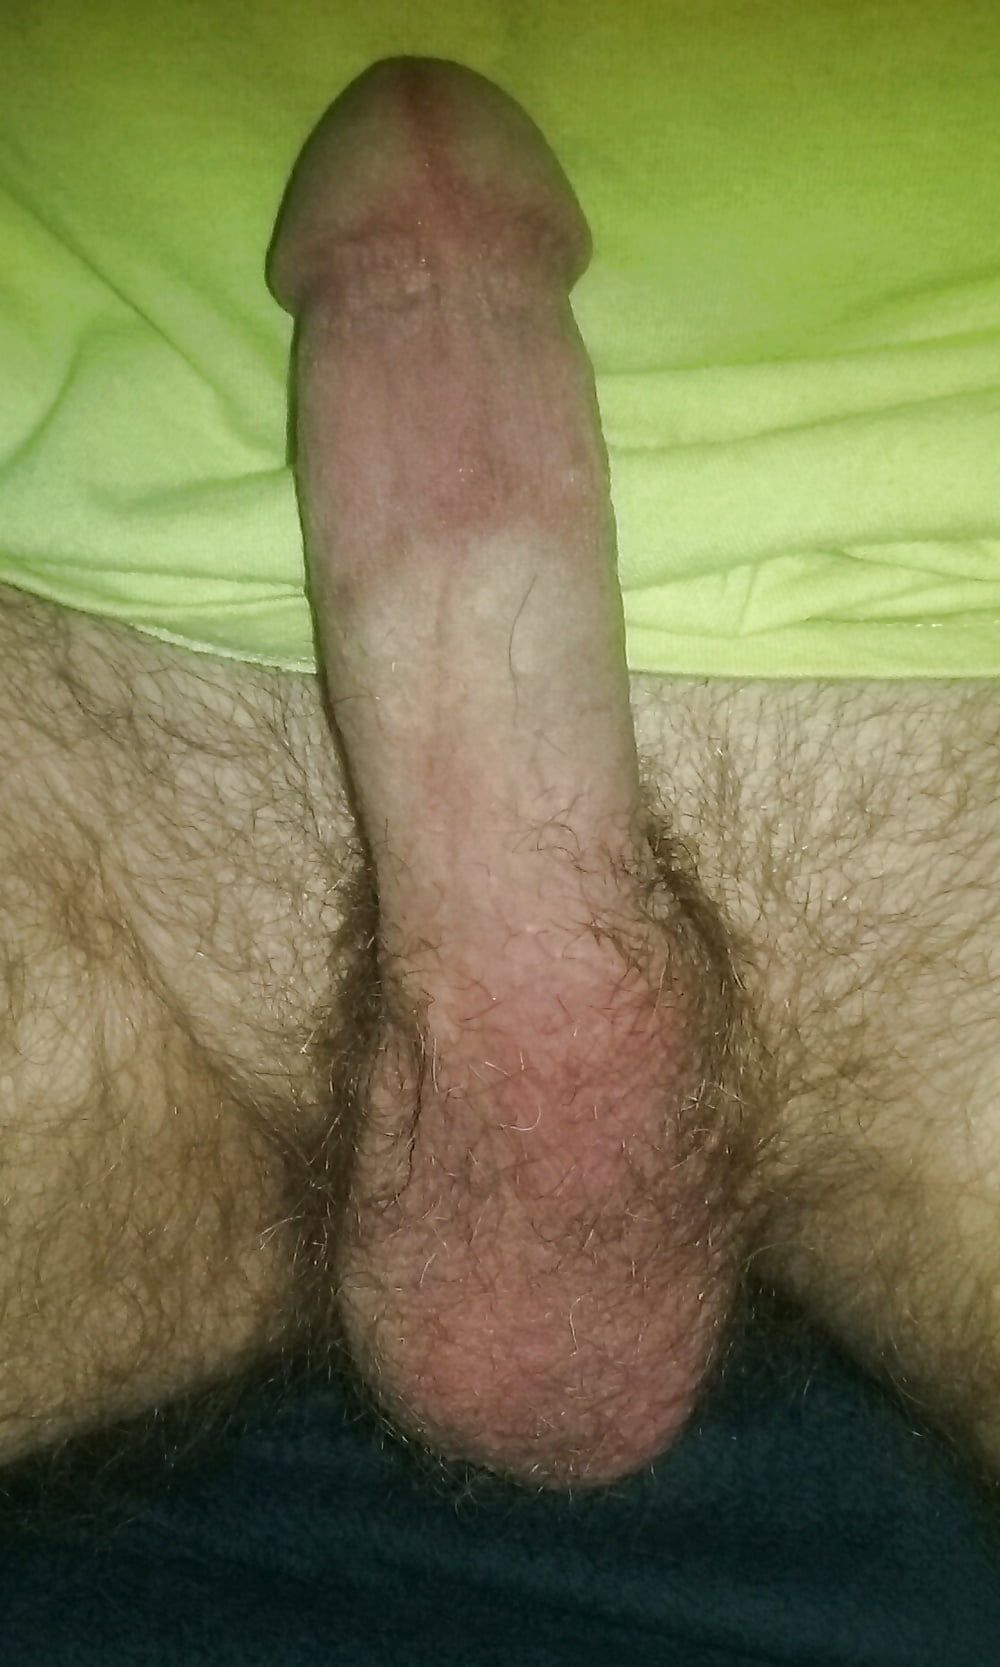 More pictures of my Cock #14